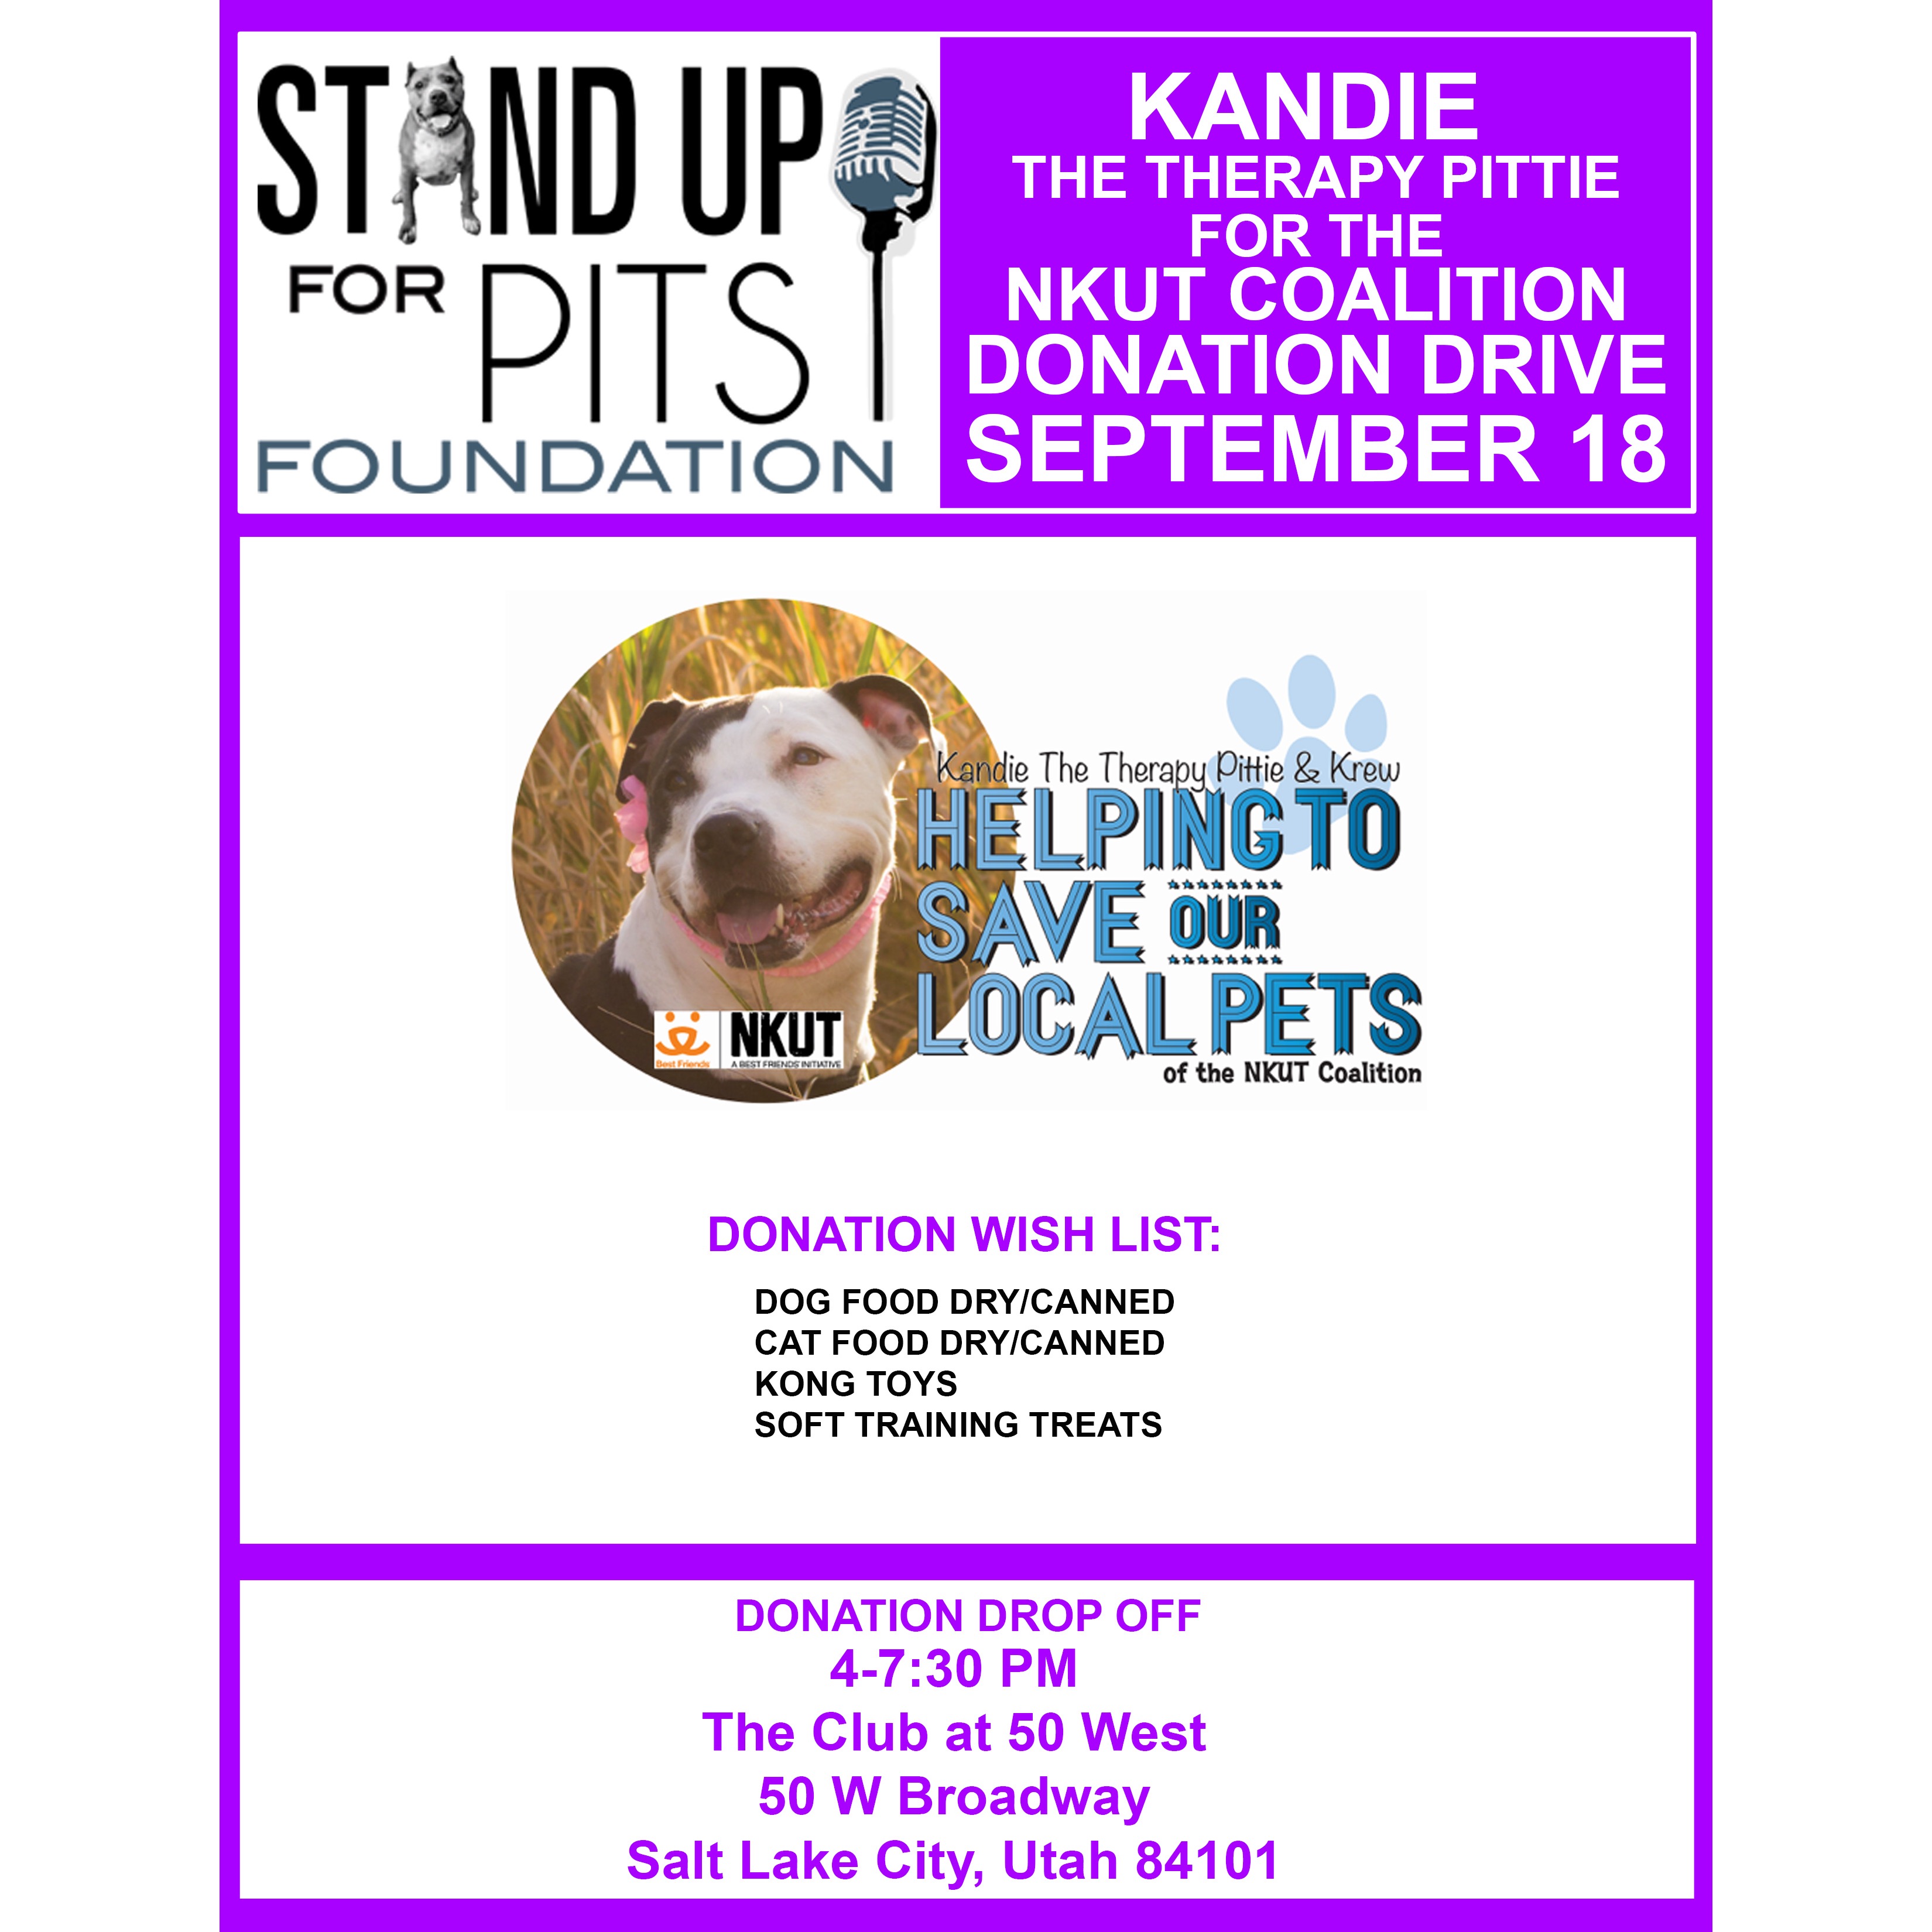 SALT LAKE CITY Stand Up For Pits DONATION DRIVE!!